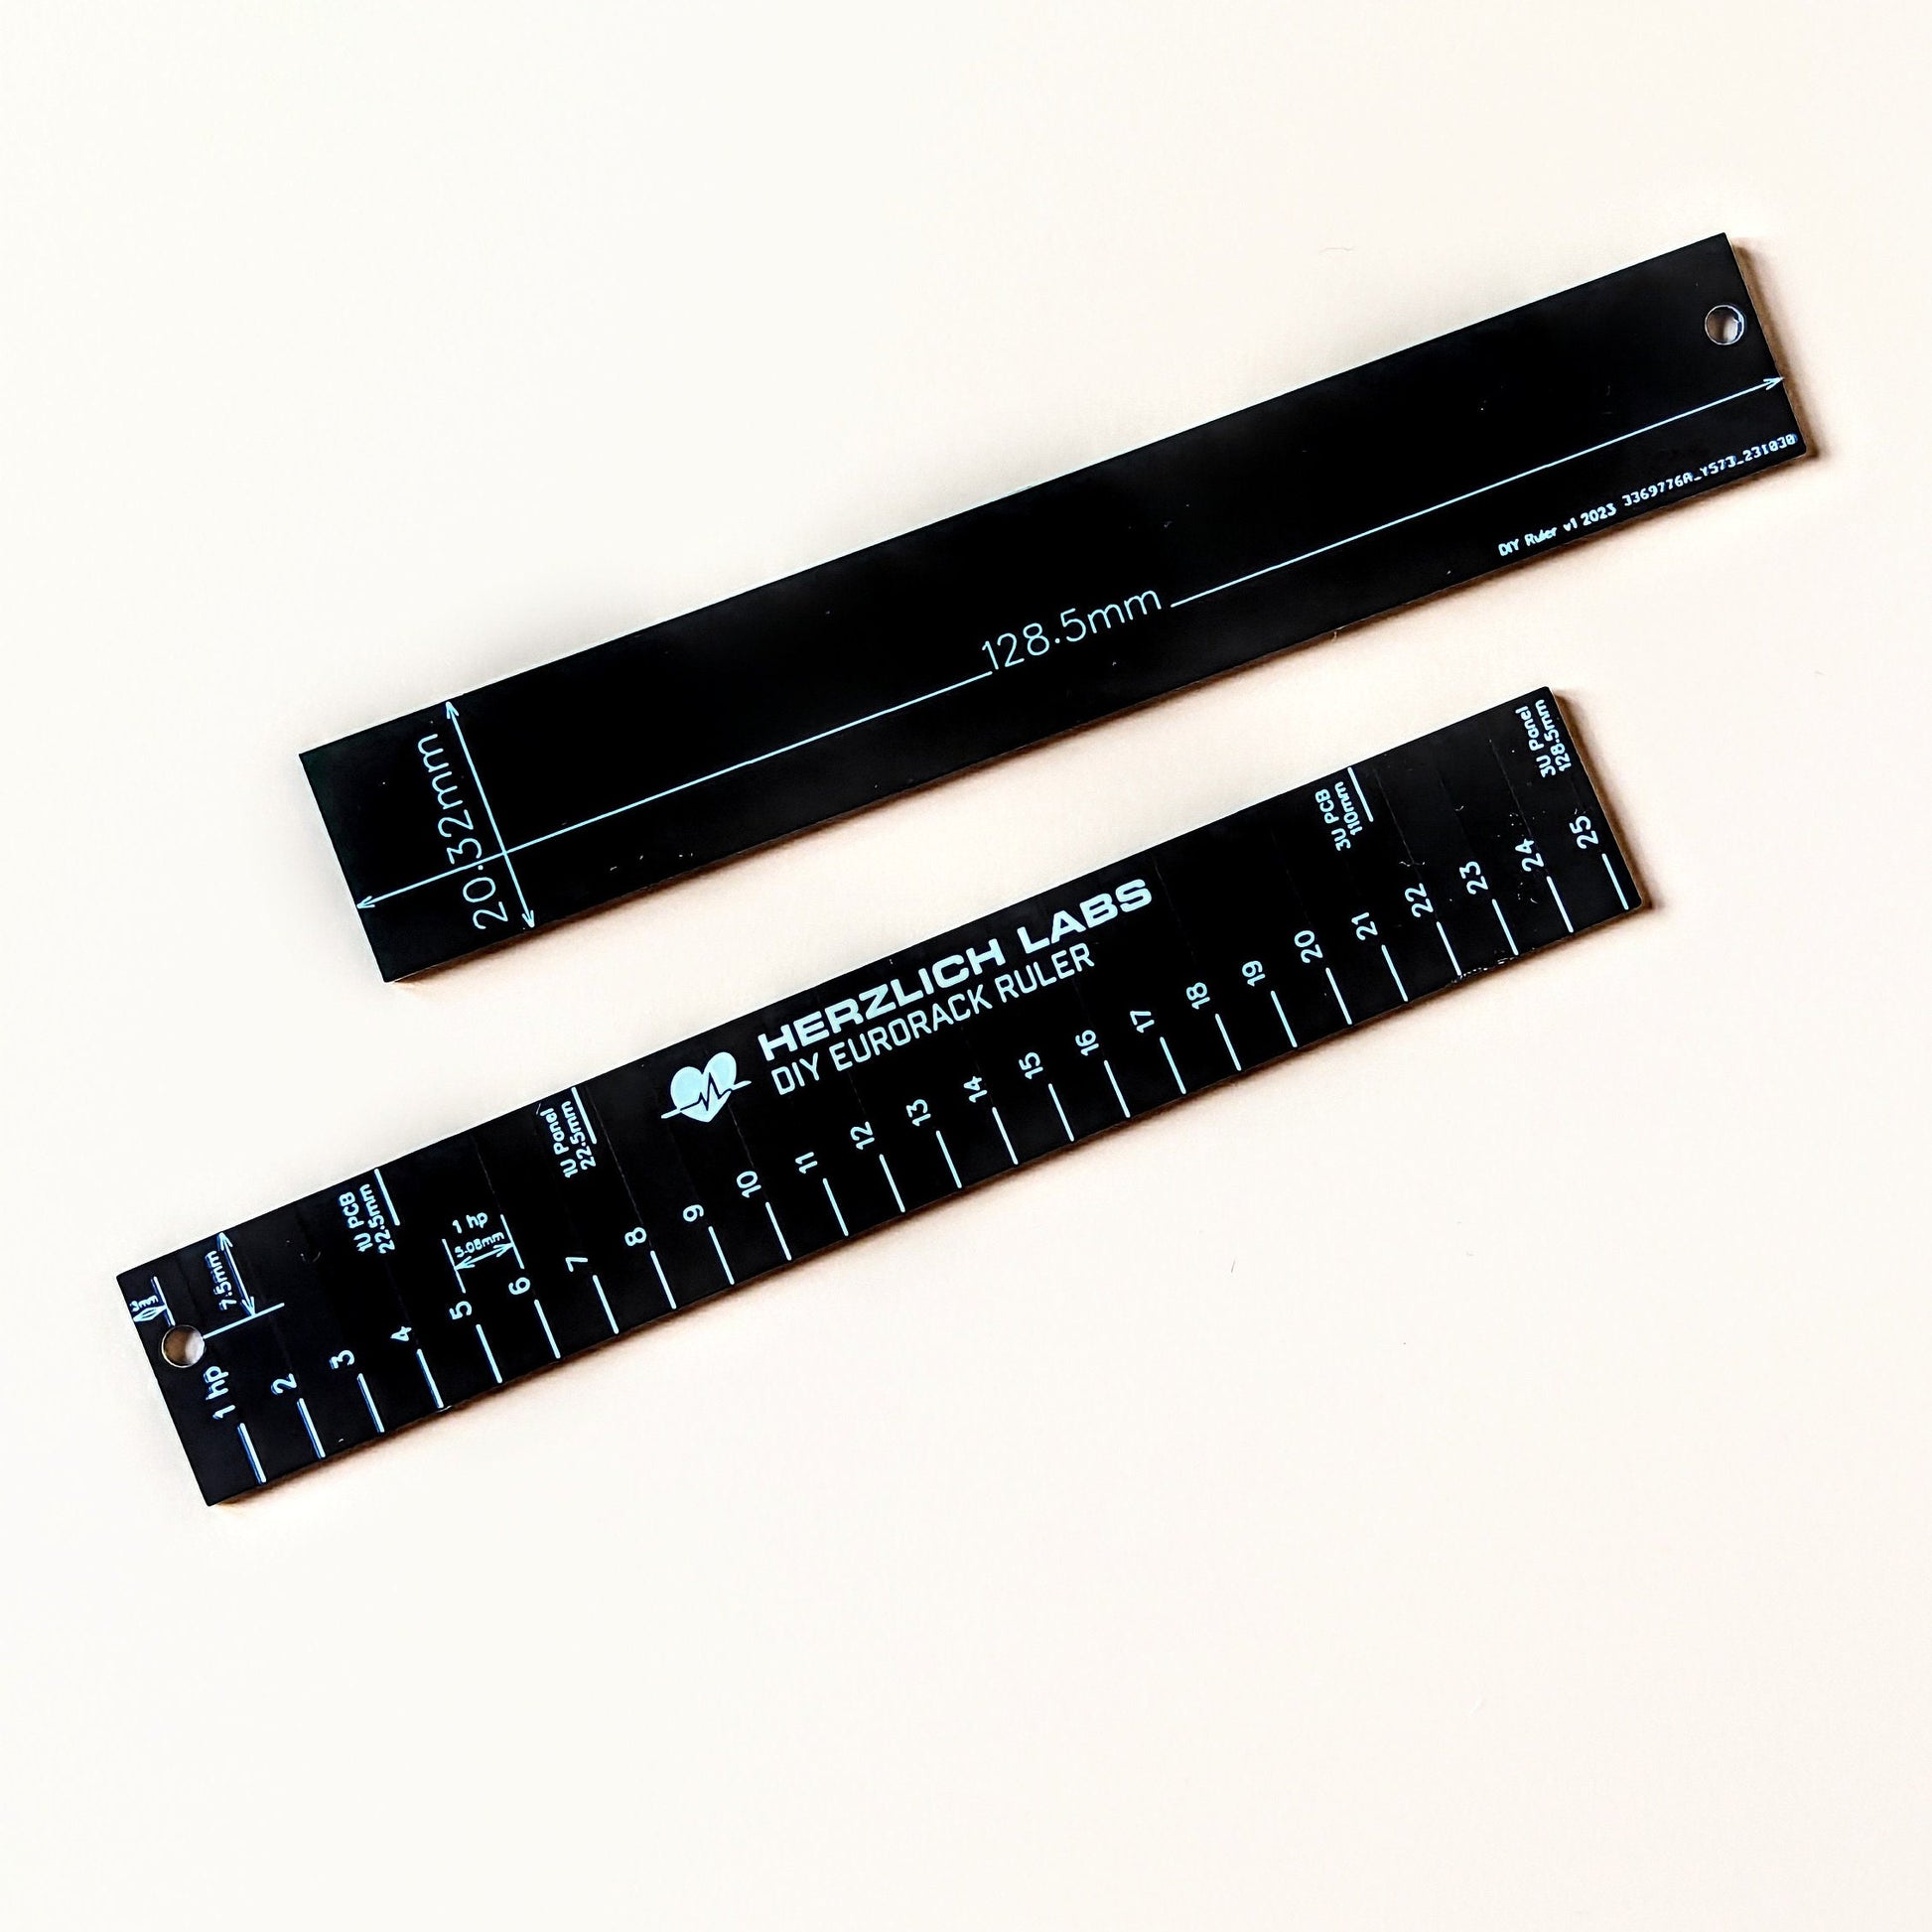 DIY Eurorack Ruler - measure modules up to 25hp and common spacings in DIY Eurorack projects